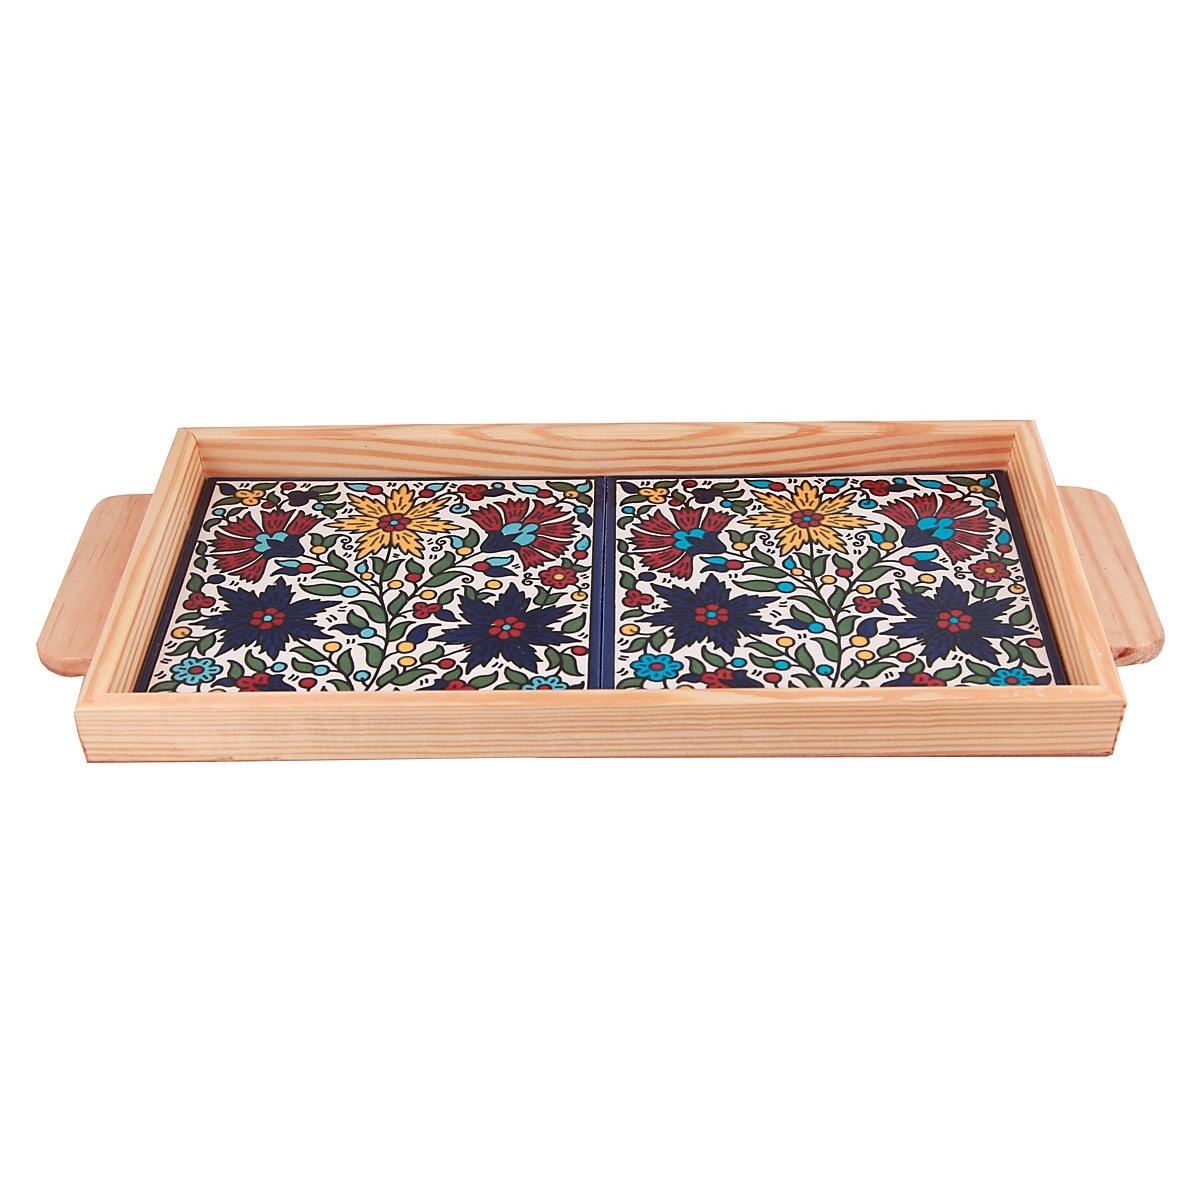  Armenian Ceramic & Wooden Tray. Colorful Floral Bouquet - 1